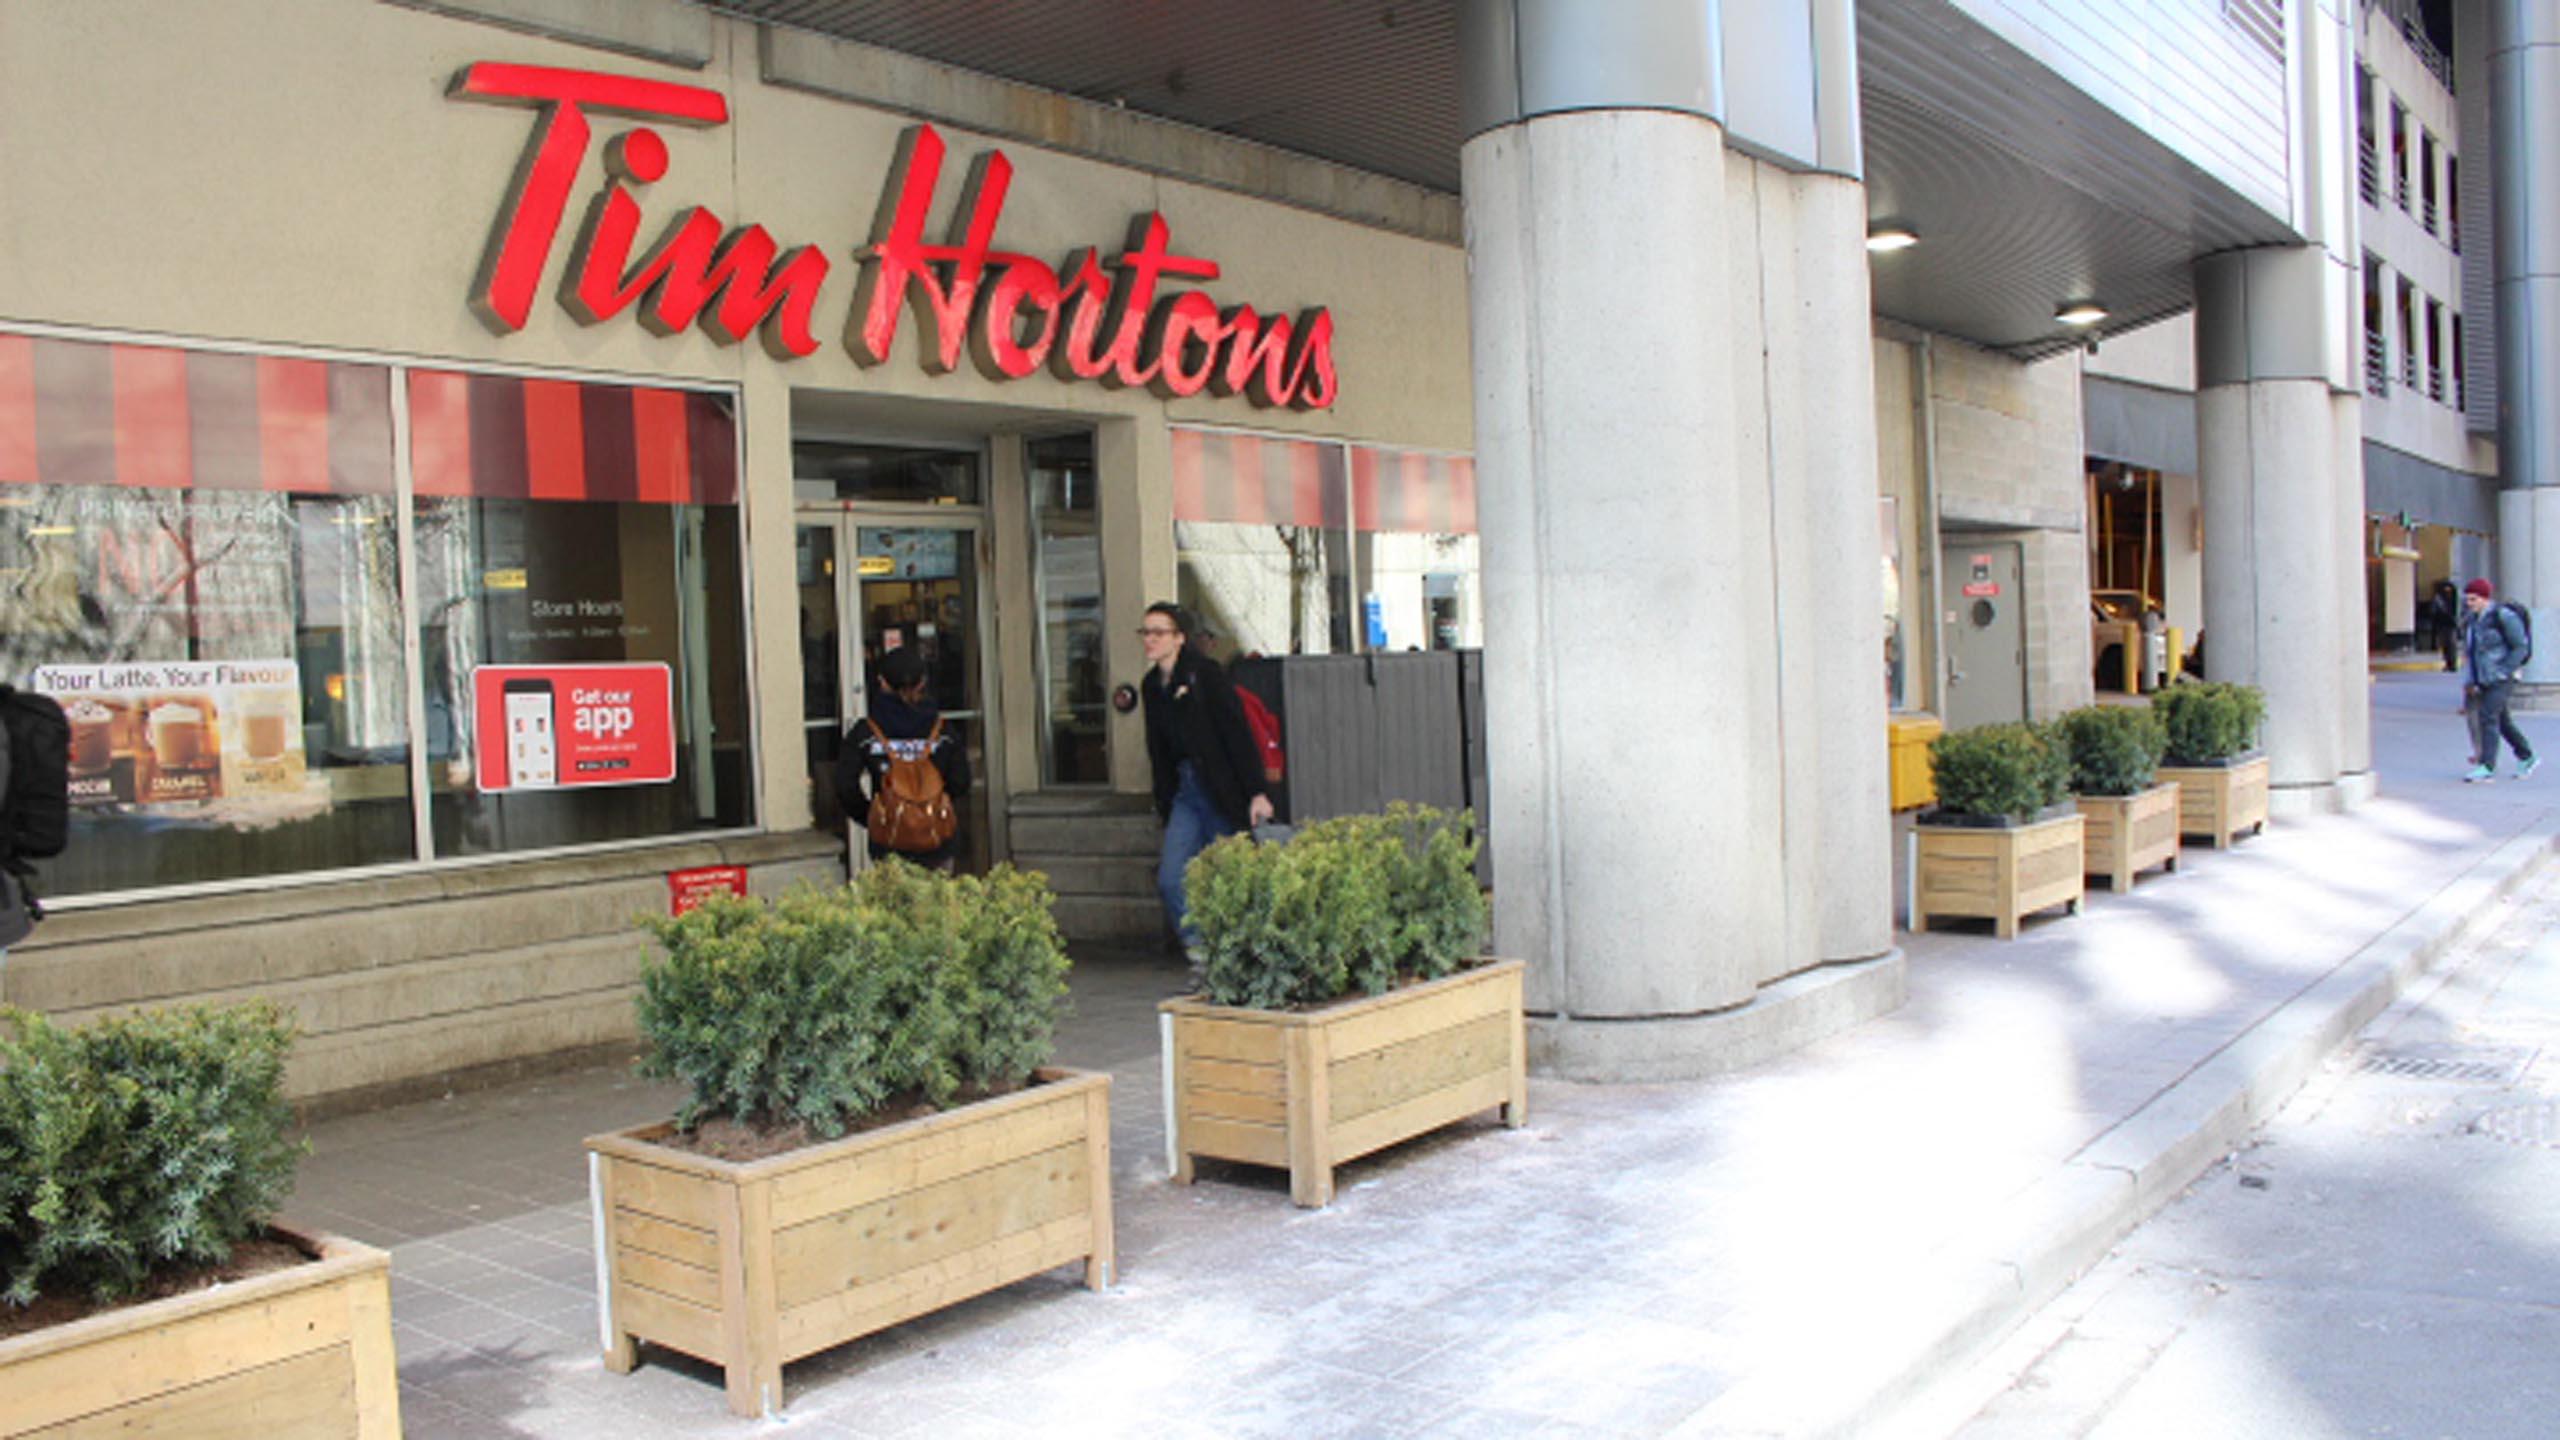 Potted planters alongside the curb in front of a Tim Hortons restaurant.